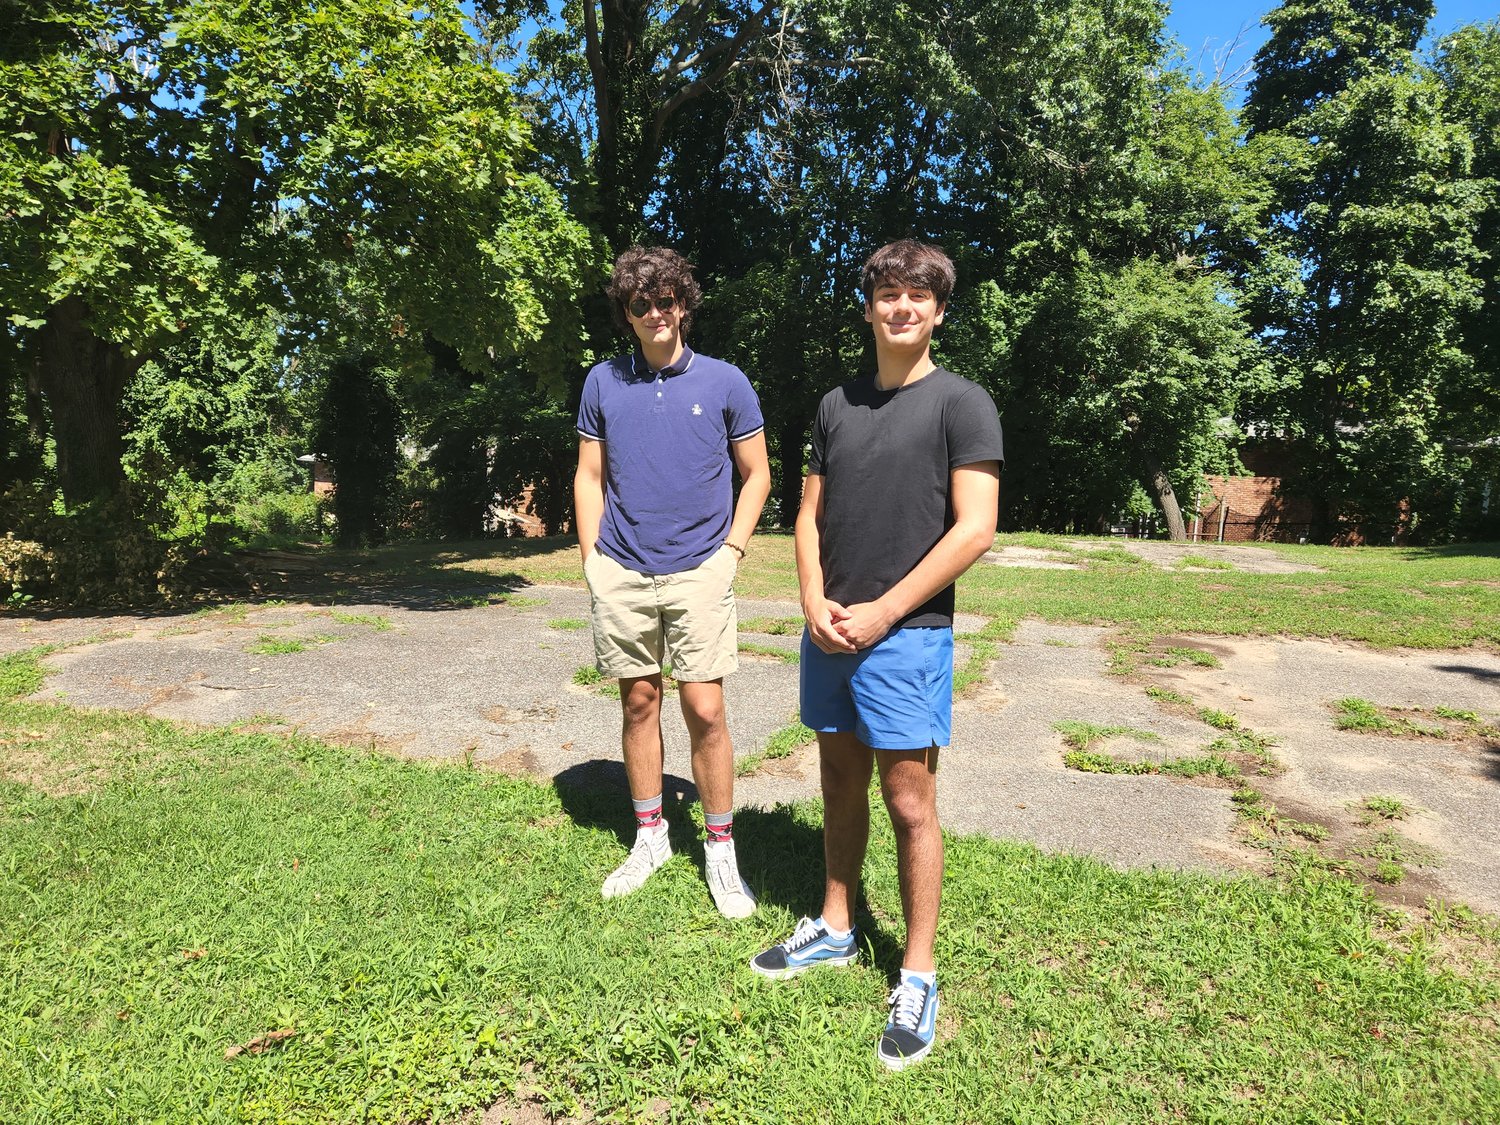 Glen Cove High School seniors William Santamaria, left, and Aiden Costella, plan to renovate Big Ralph Park, where one issue is cracked cement. They have started a Gofundme page to raise money for supplies.